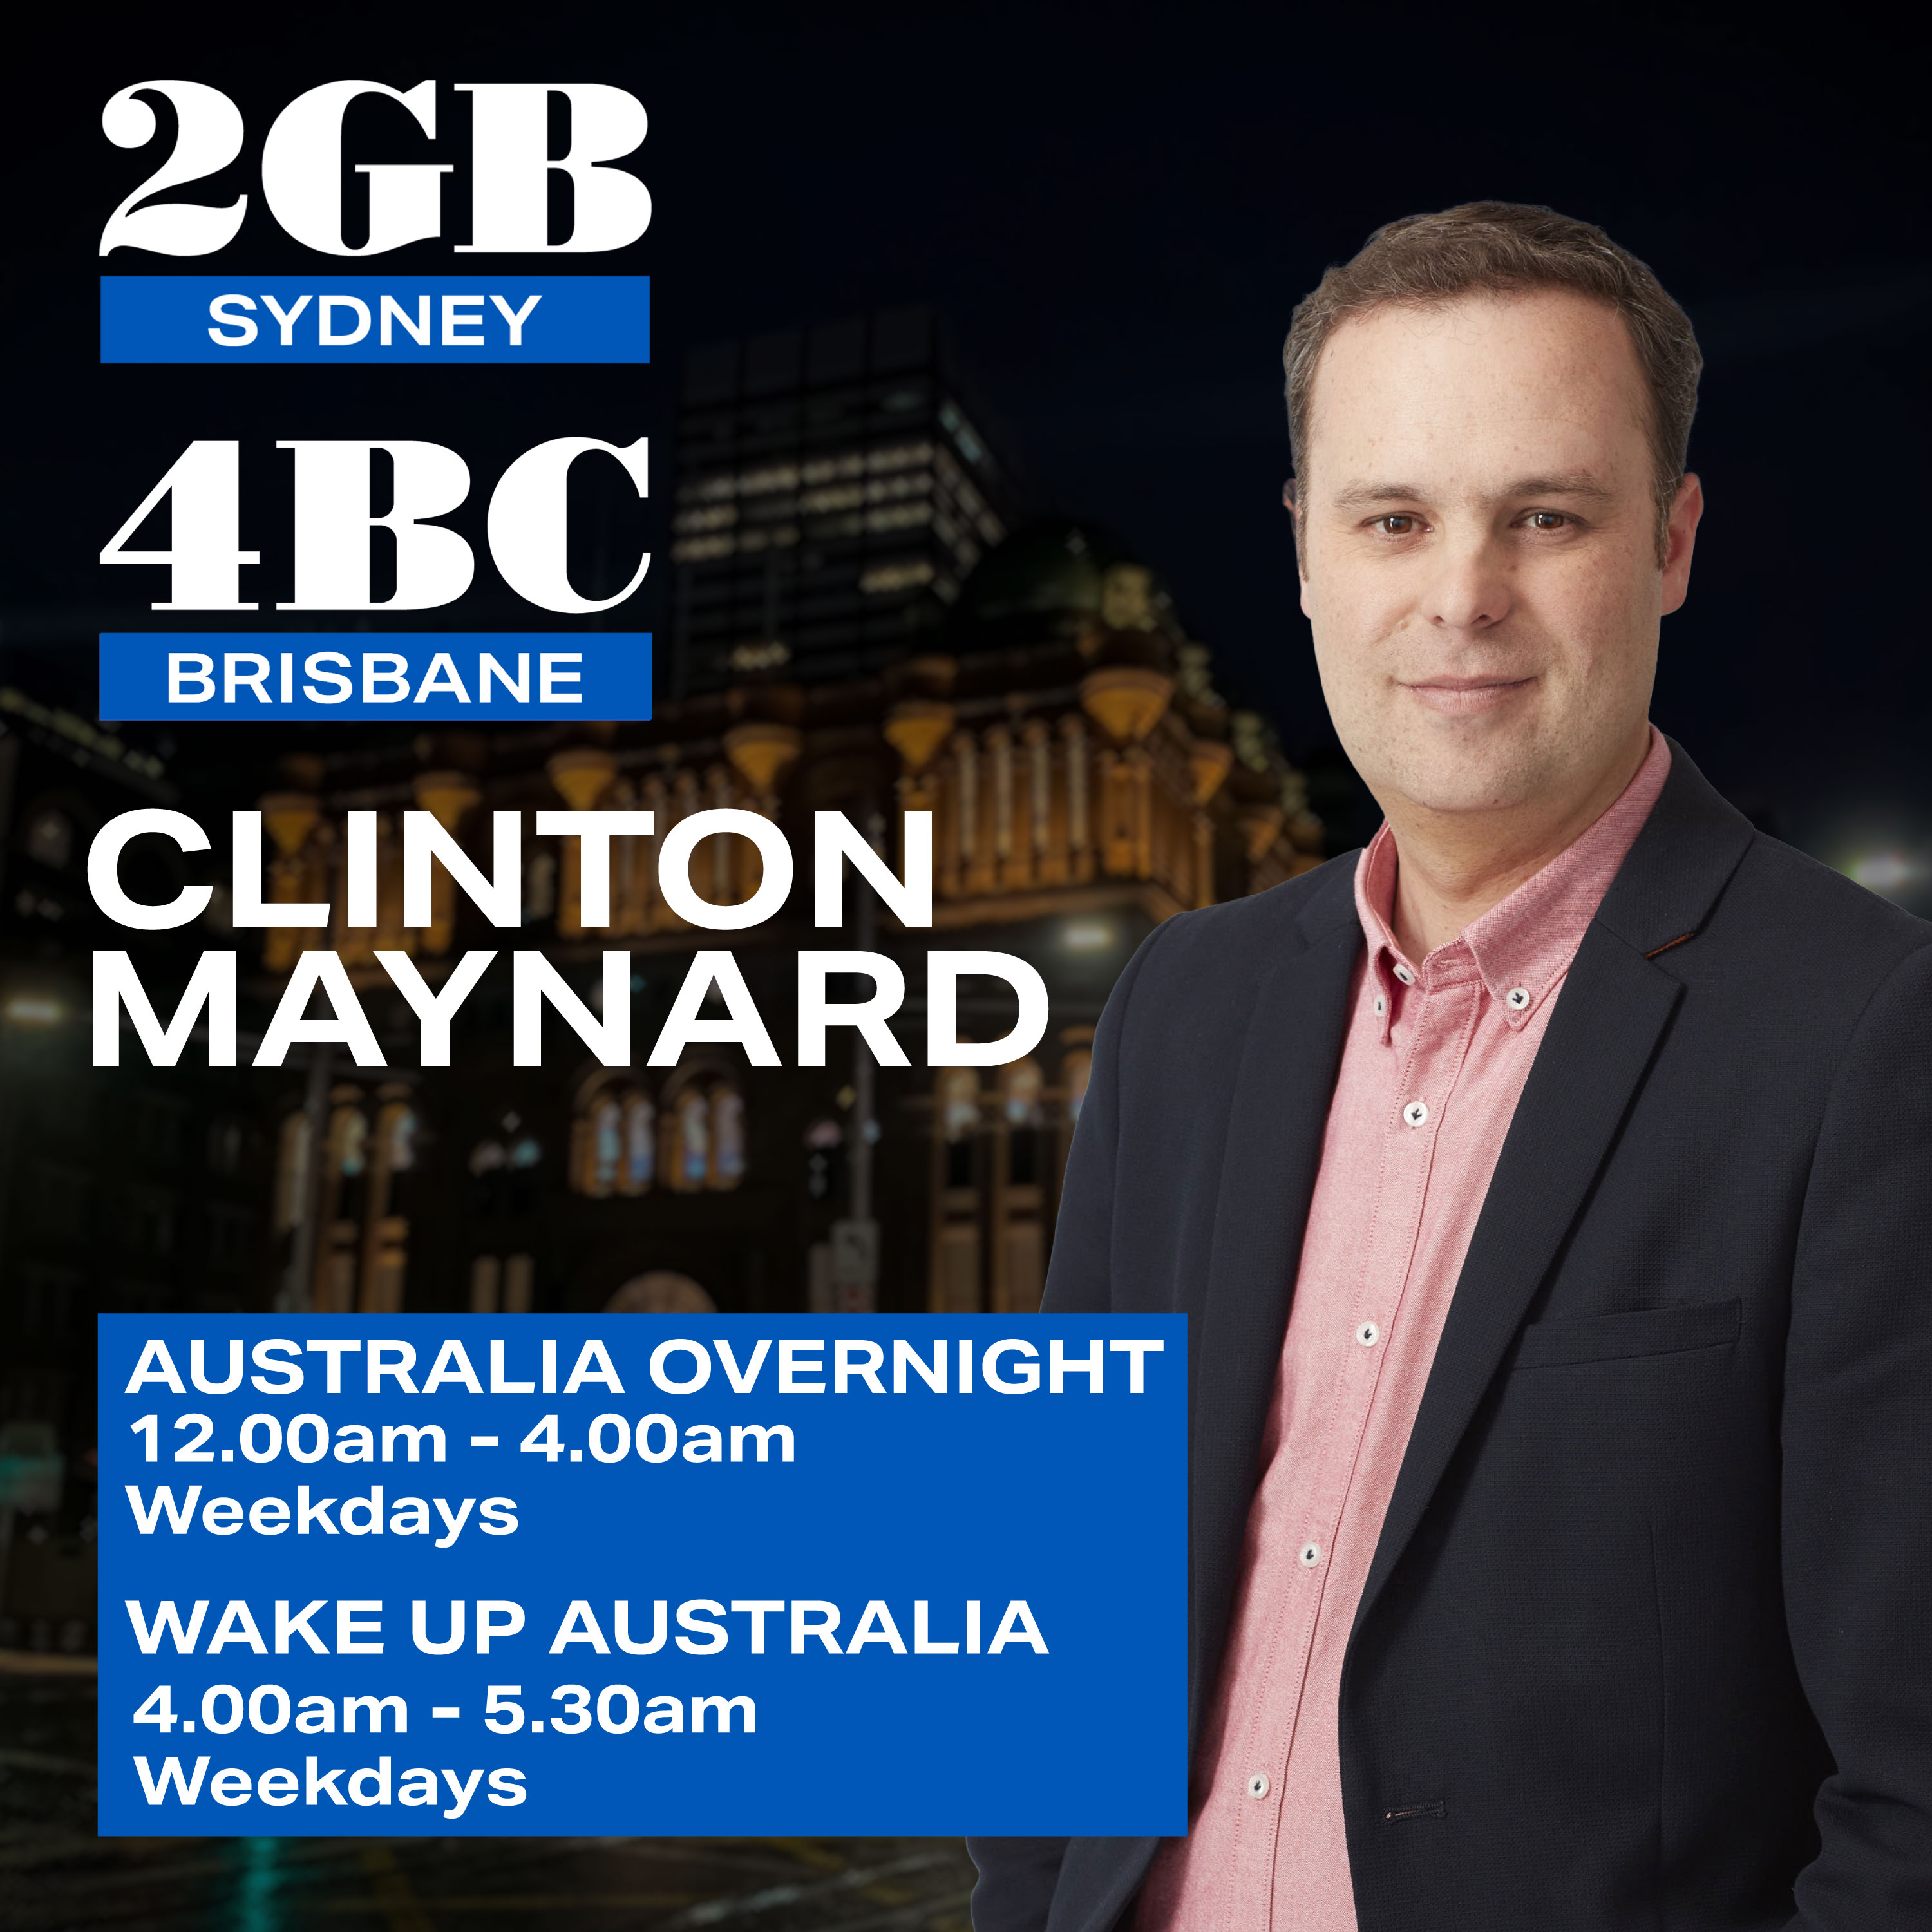 Overnights with Clinton Maynard - Friday, 26th of April